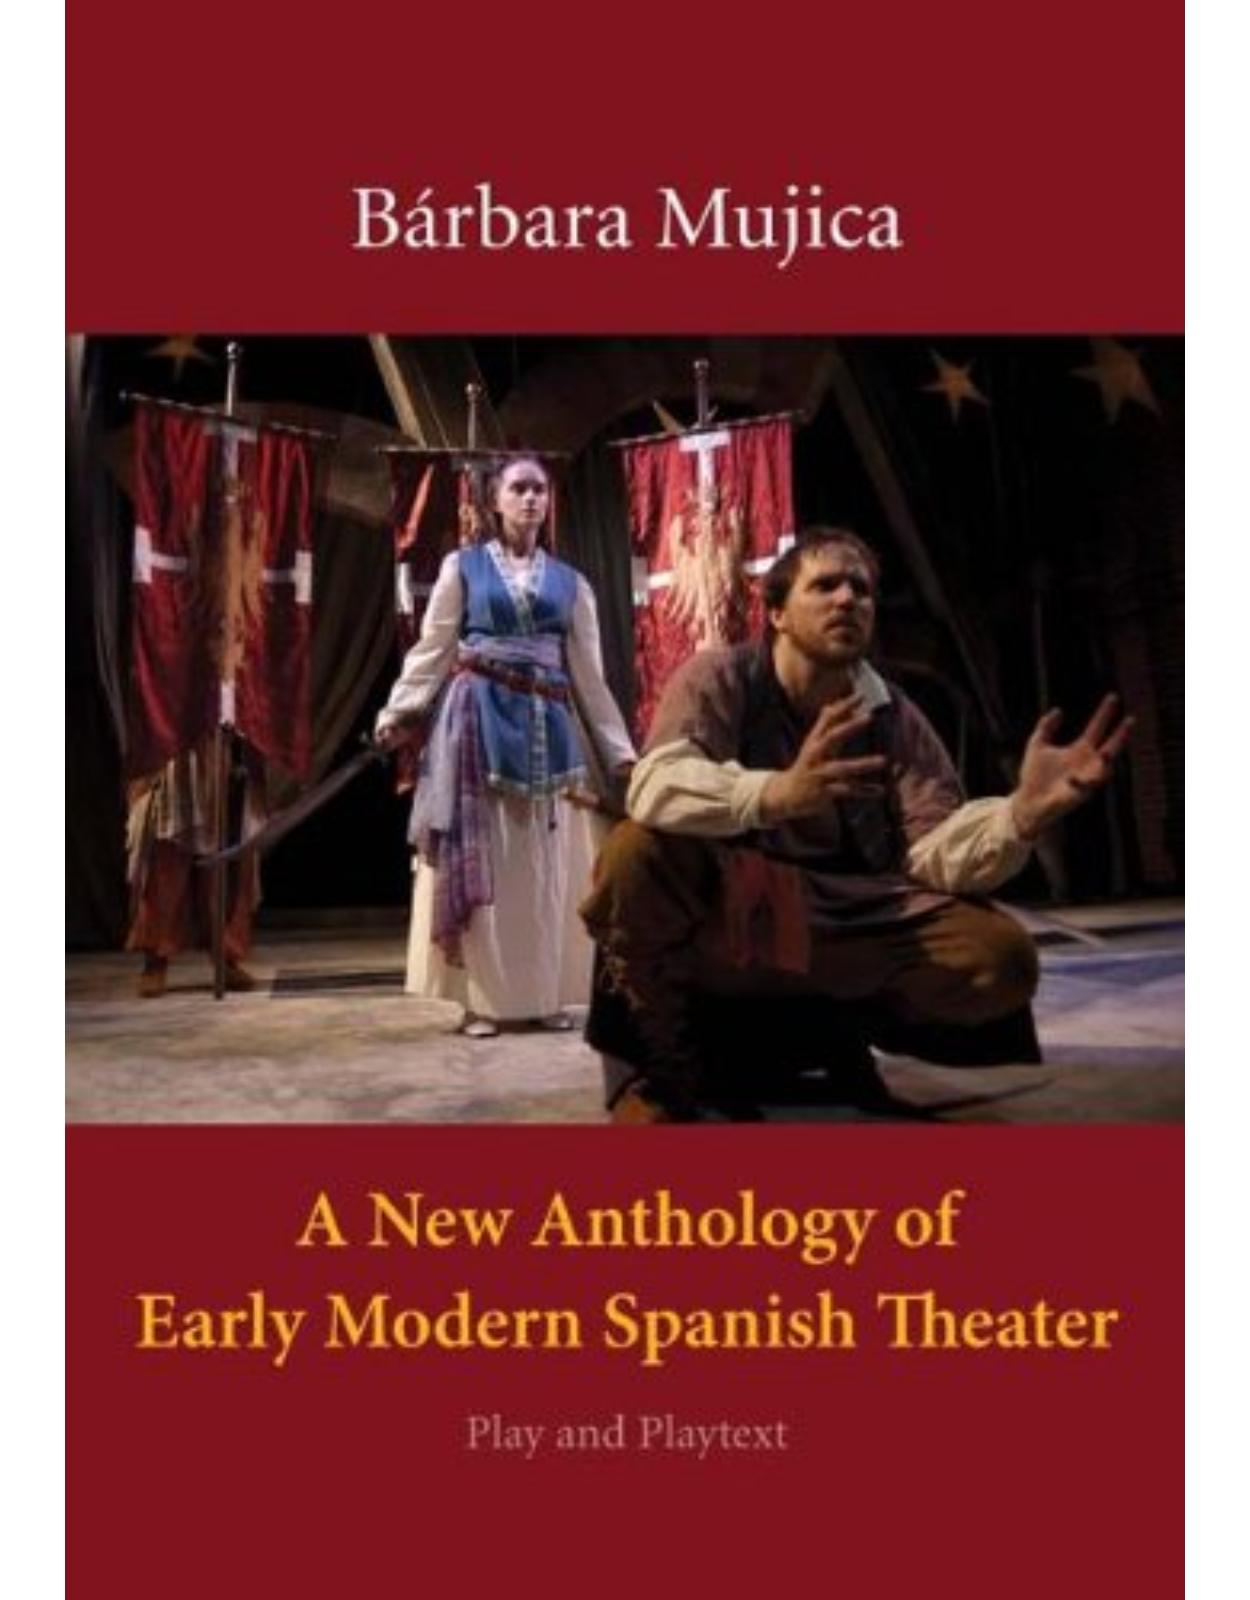 New Anthology of Early Modern Spanish Theater. Play and Playtext